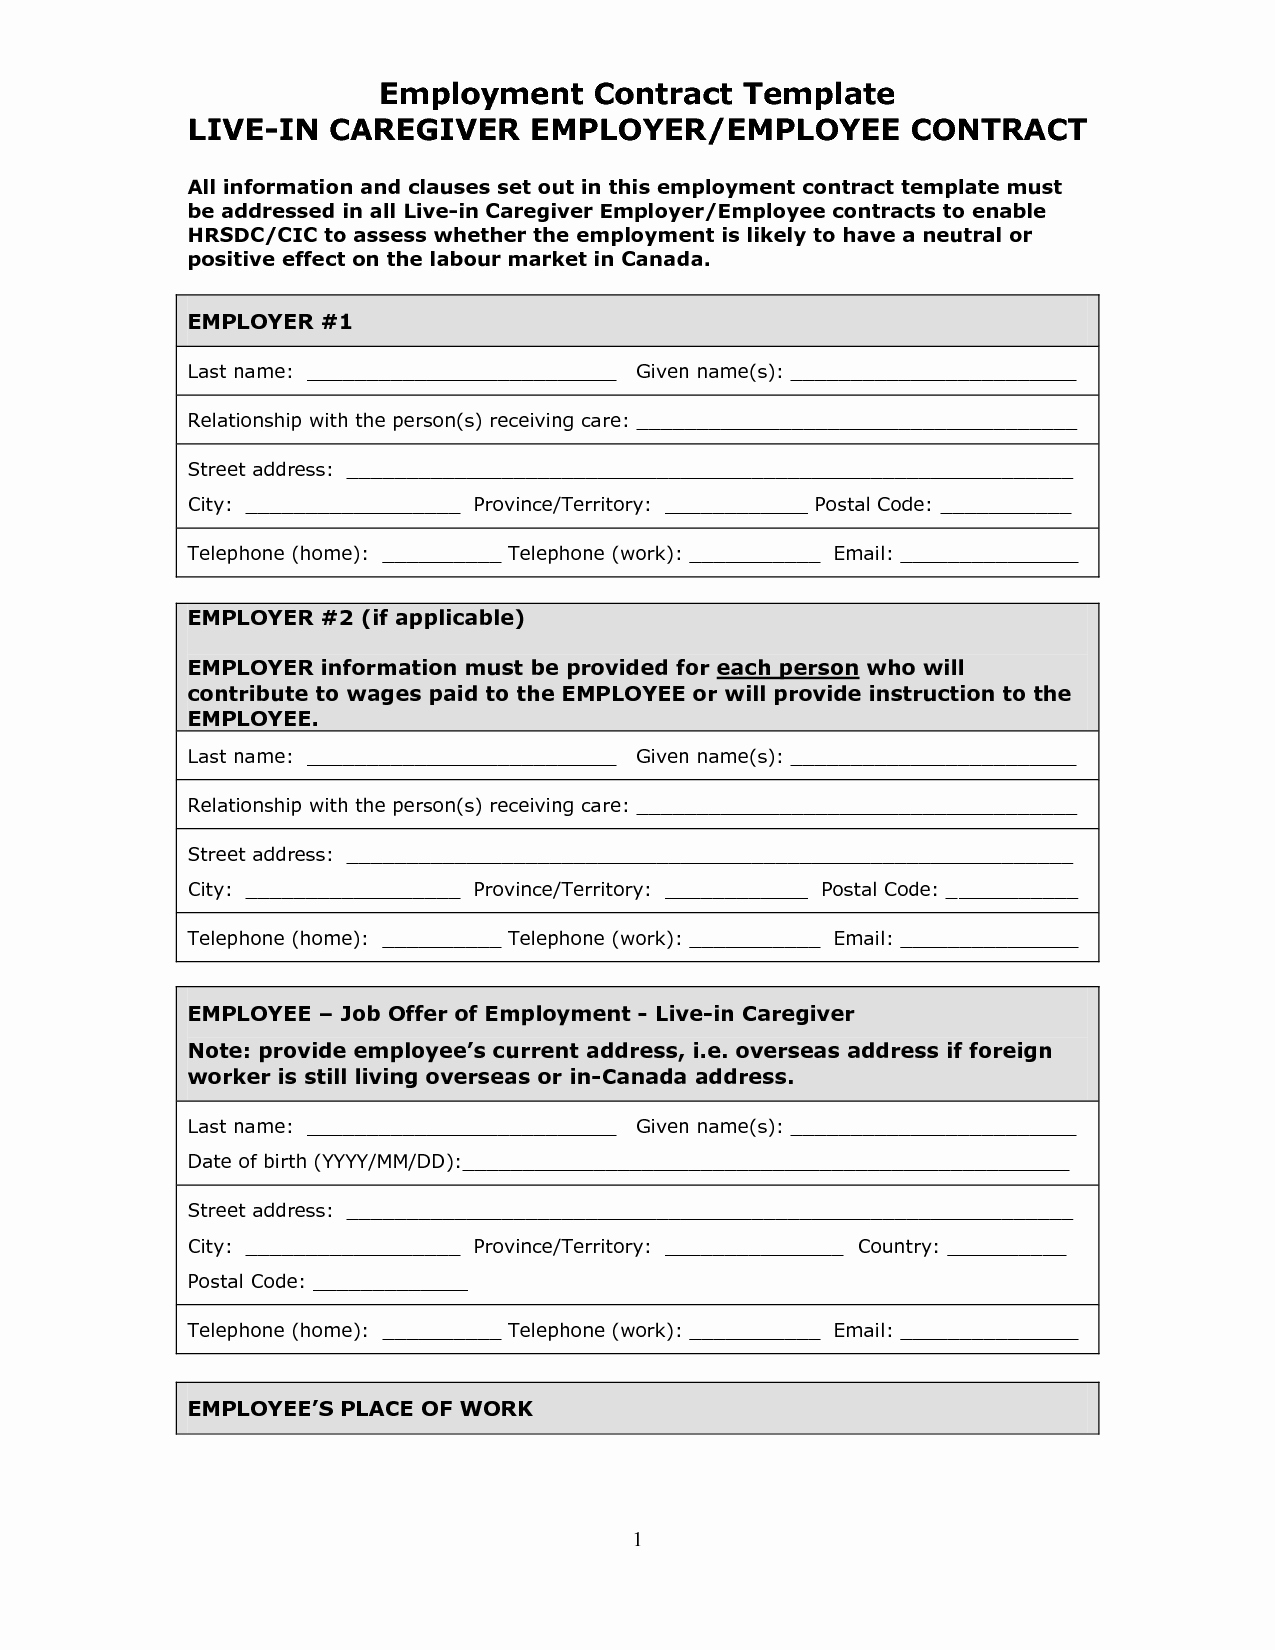 Employment Contract Template Word Elegant Employment Contract Template